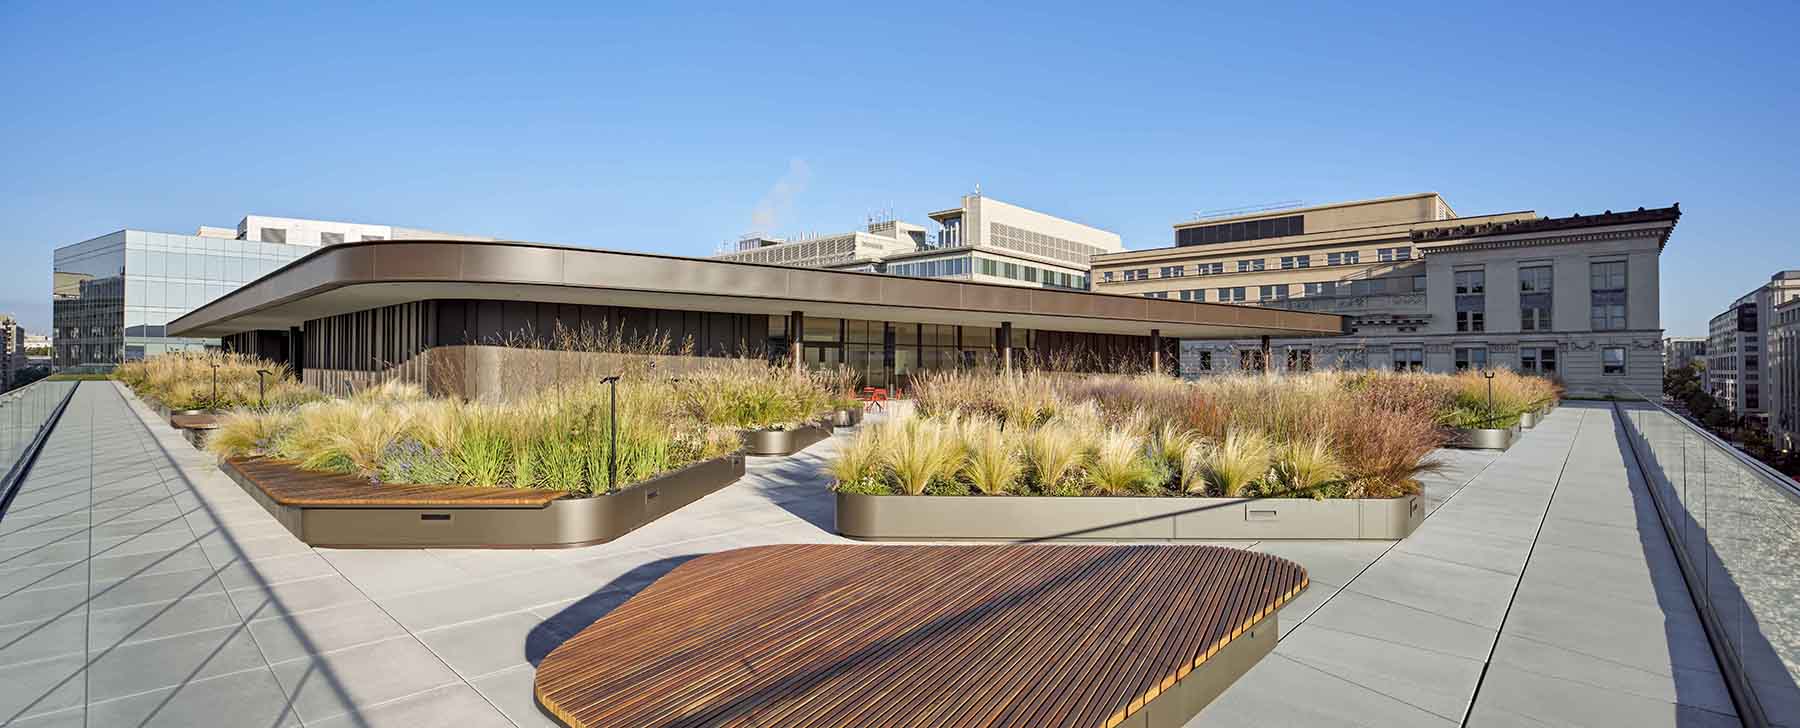 exterior shot of the rooftop deck and auditorium showing green spaces and benches